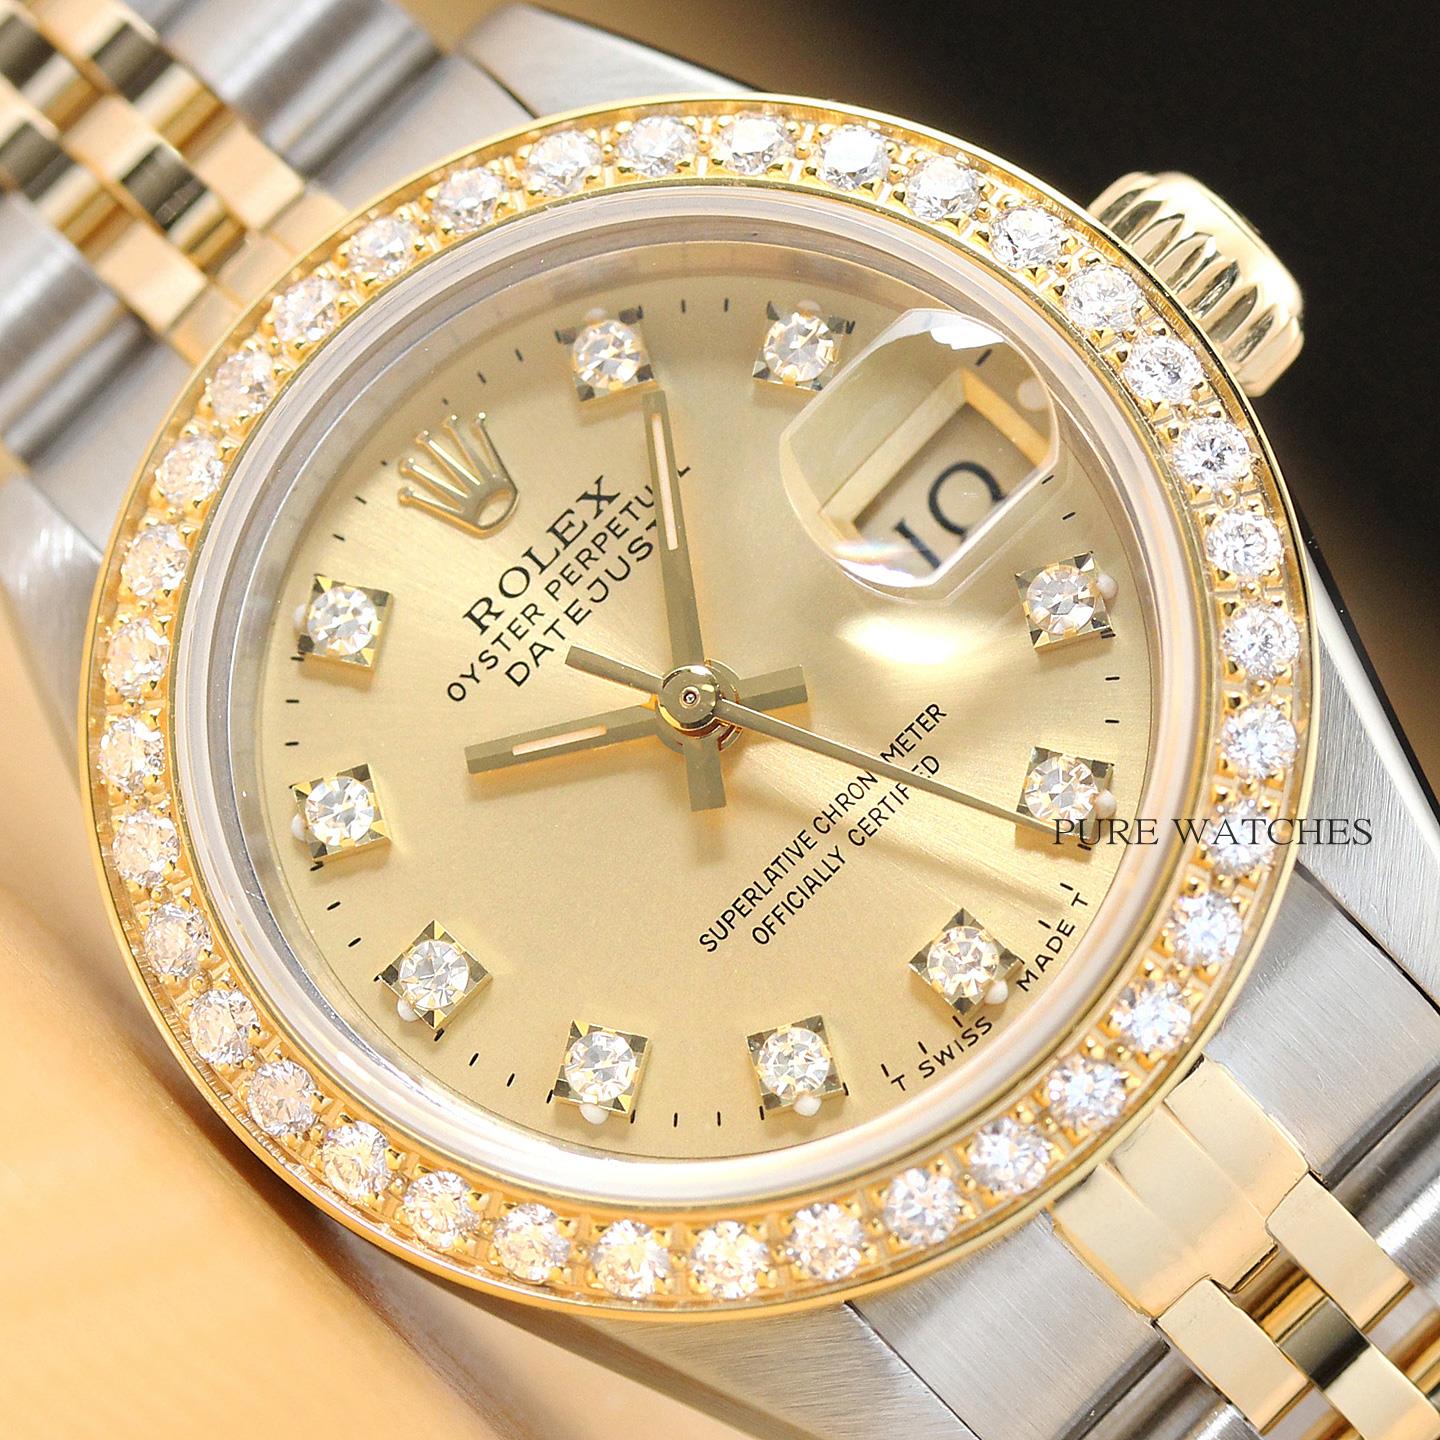 do rolex watches have real diamonds